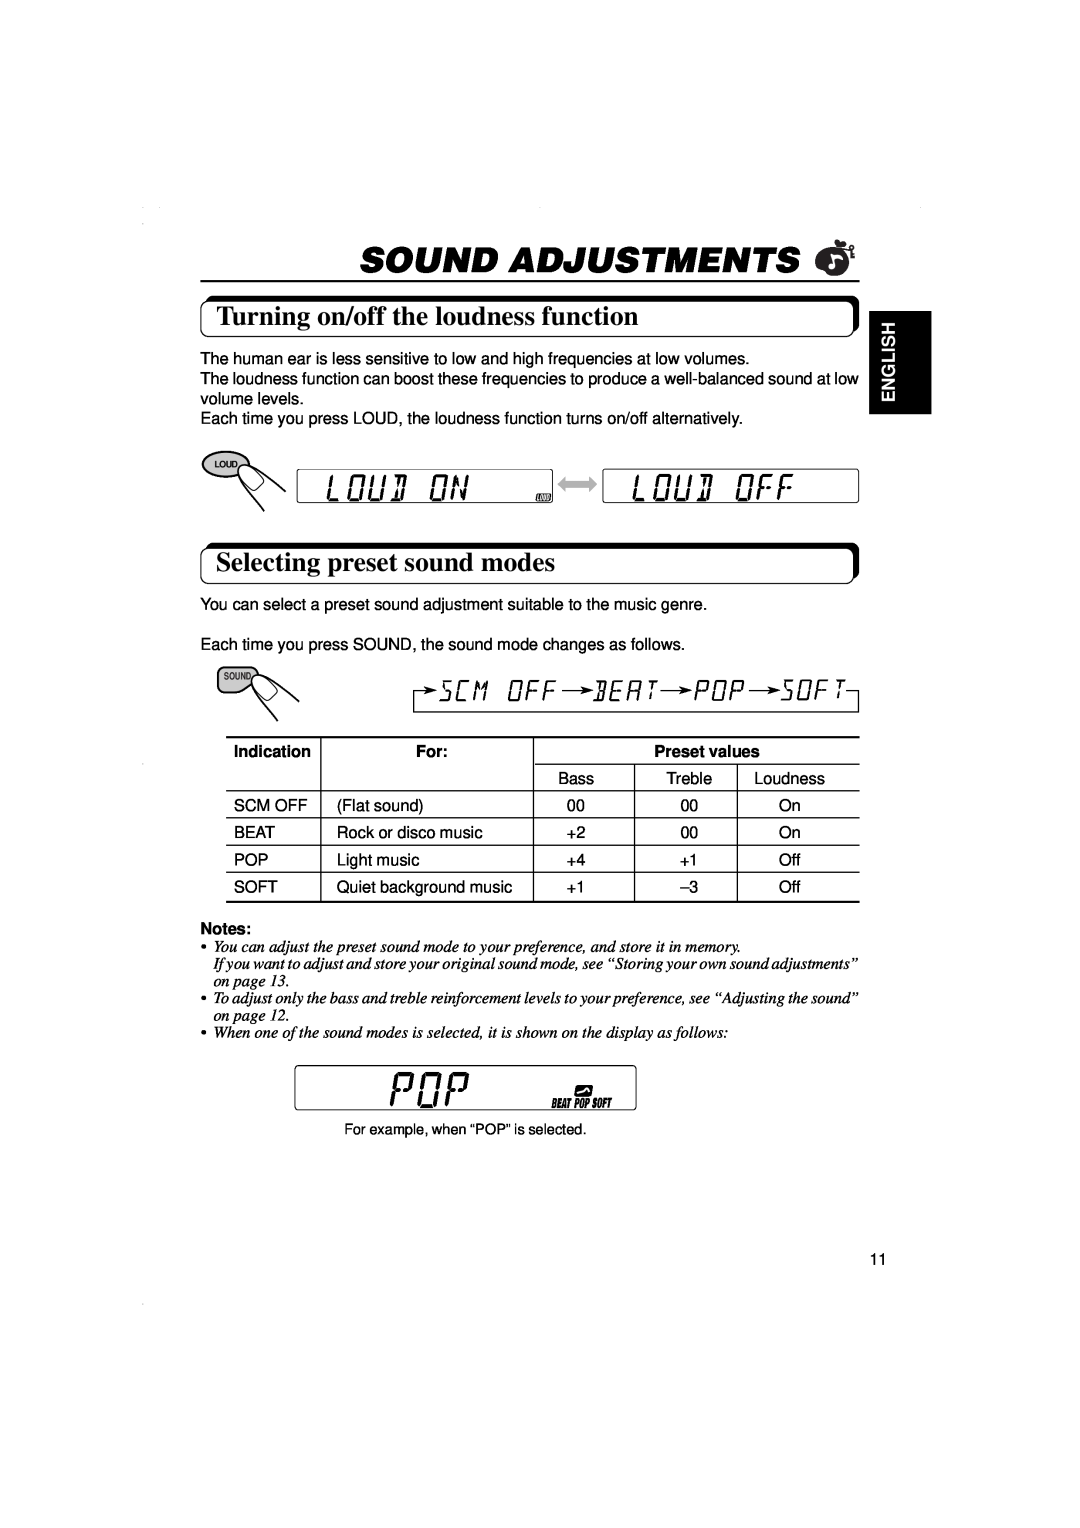 JVC KS-F315EE Sound Adjustments, Turning on/off the loudness function, Selecting preset sound modes, English, Indication 